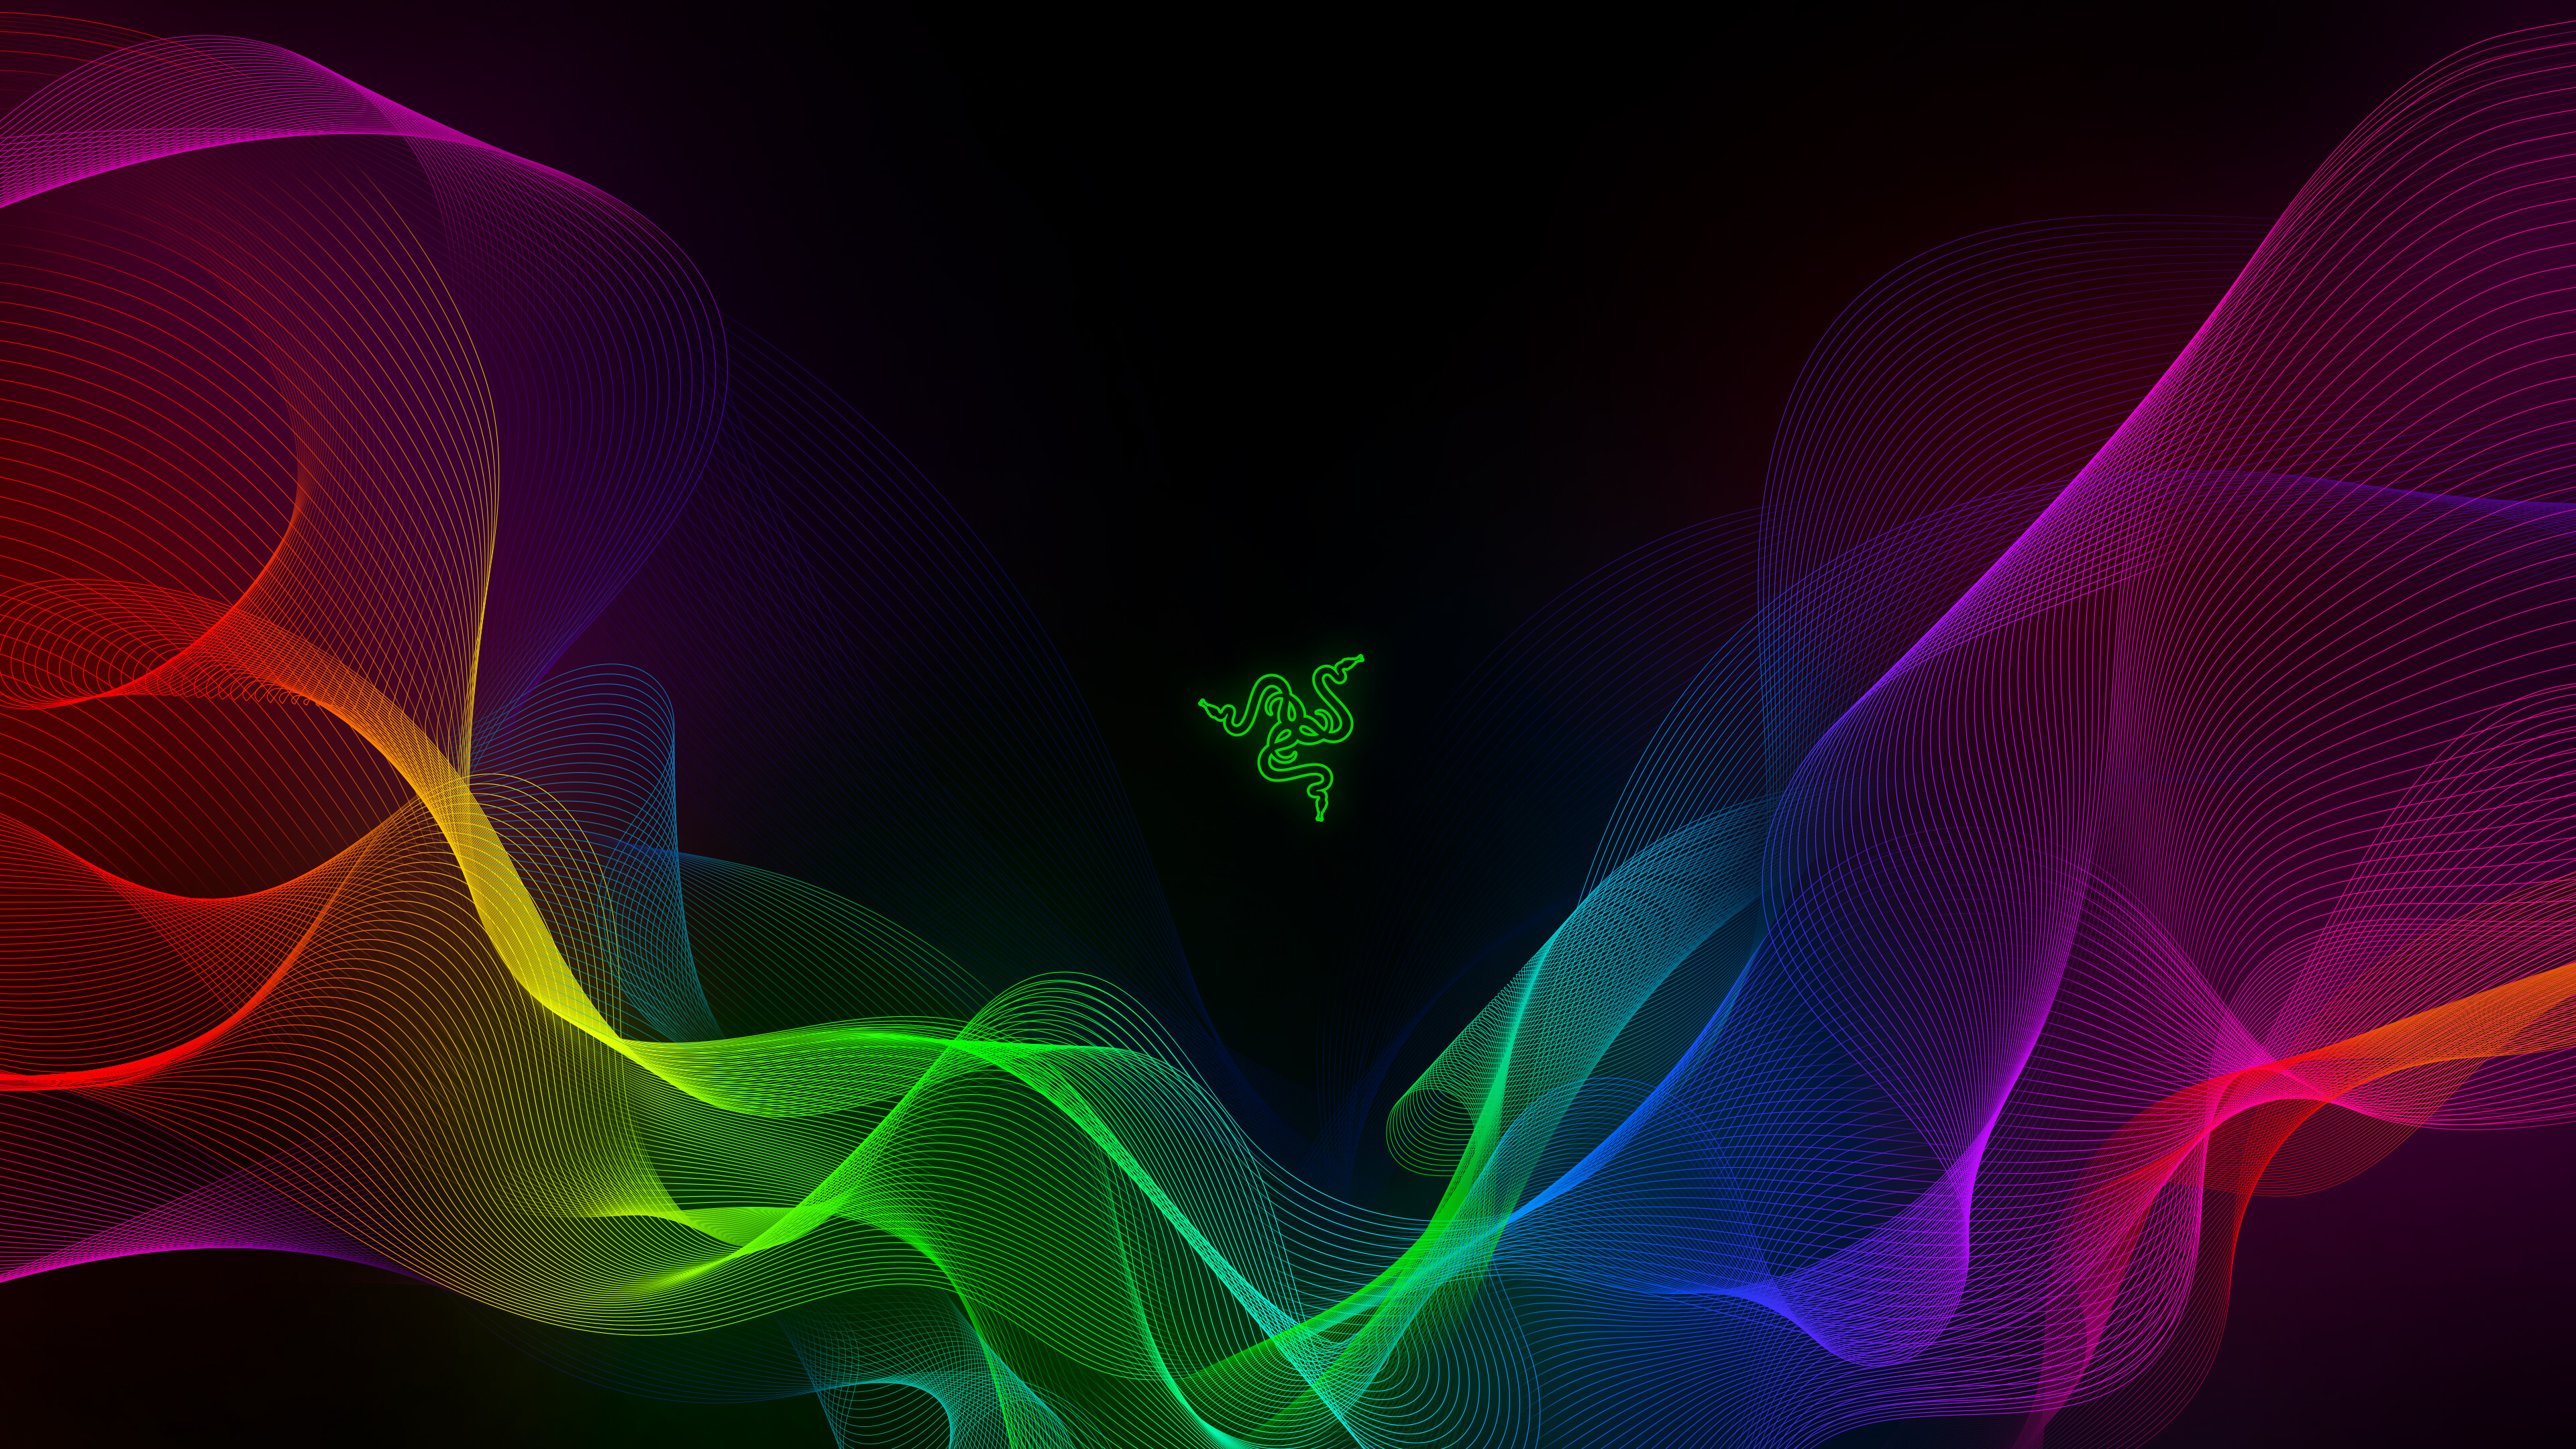 Neon: Razer, Colorful, Spectrum, Abstract, Visual effects. 3840x2160 4K Wallpaper.